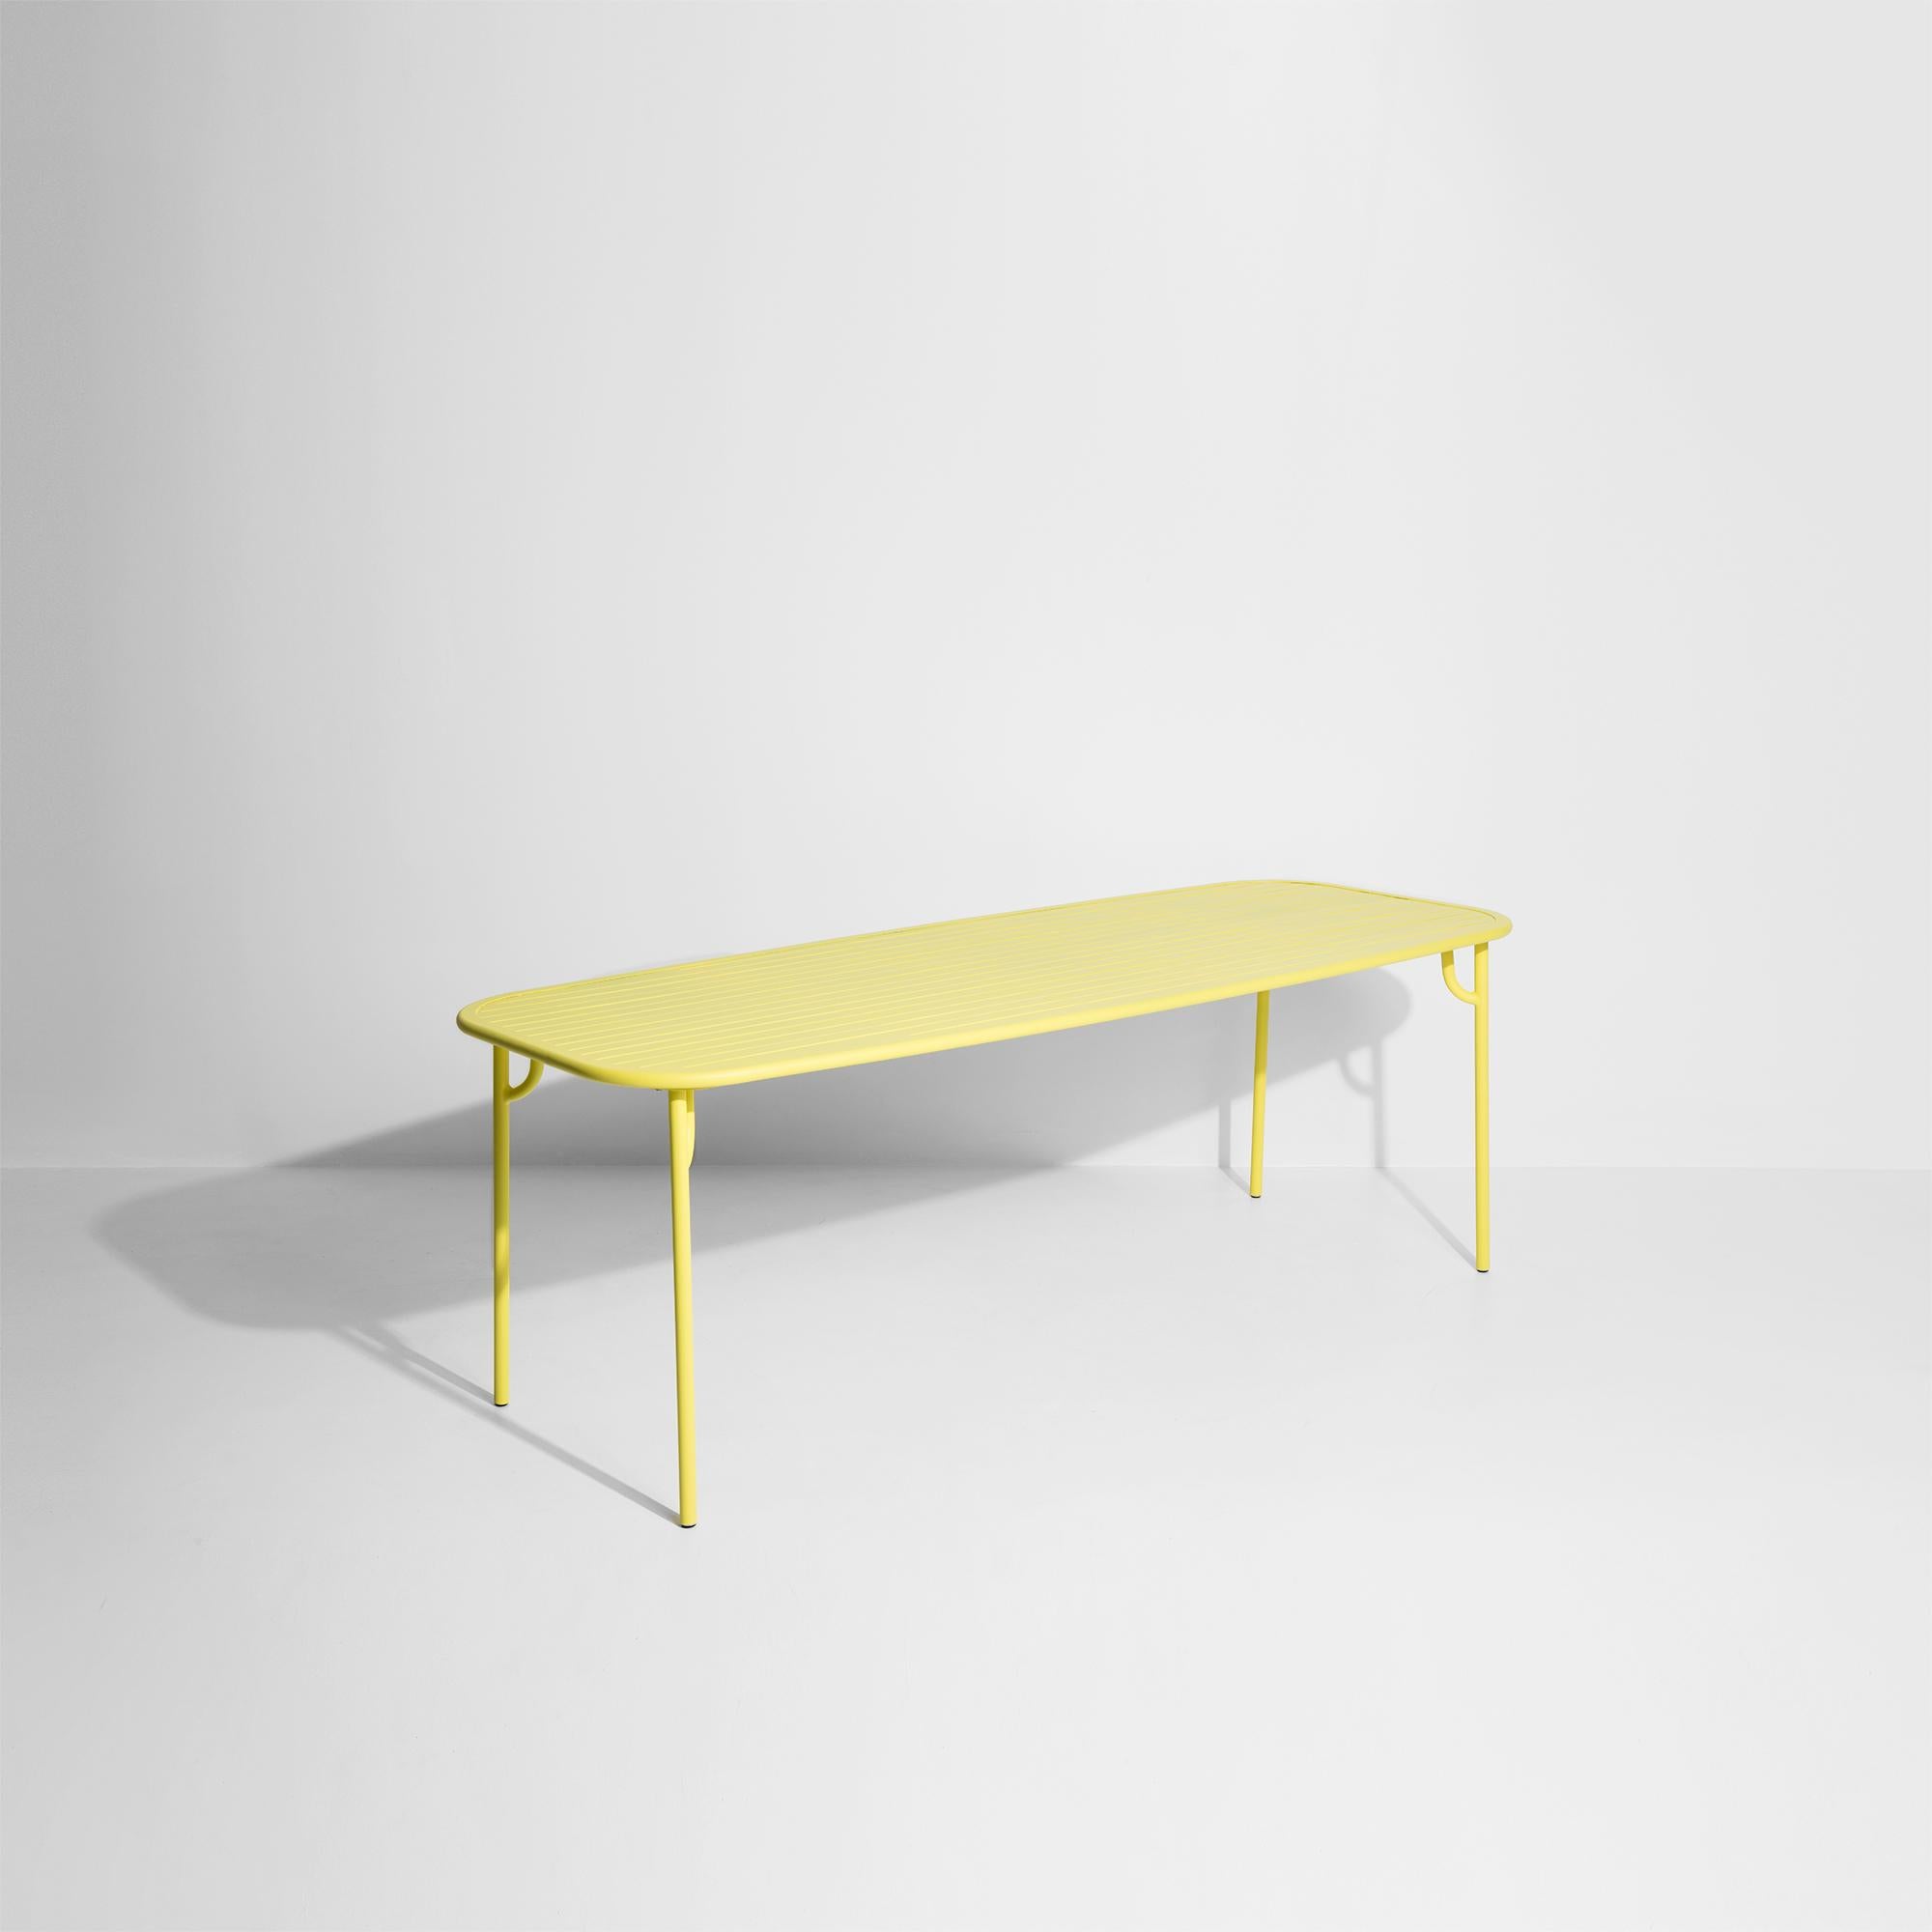 Petite Friture Week-End Large Rectangular Dining Table in Yellow Aluminium with Slats by Studio BrichetZiegler, 2017

The week-end collection is a full range of outdoor furniture, in aluminium grained epoxy paint, matt finish, that includes 18